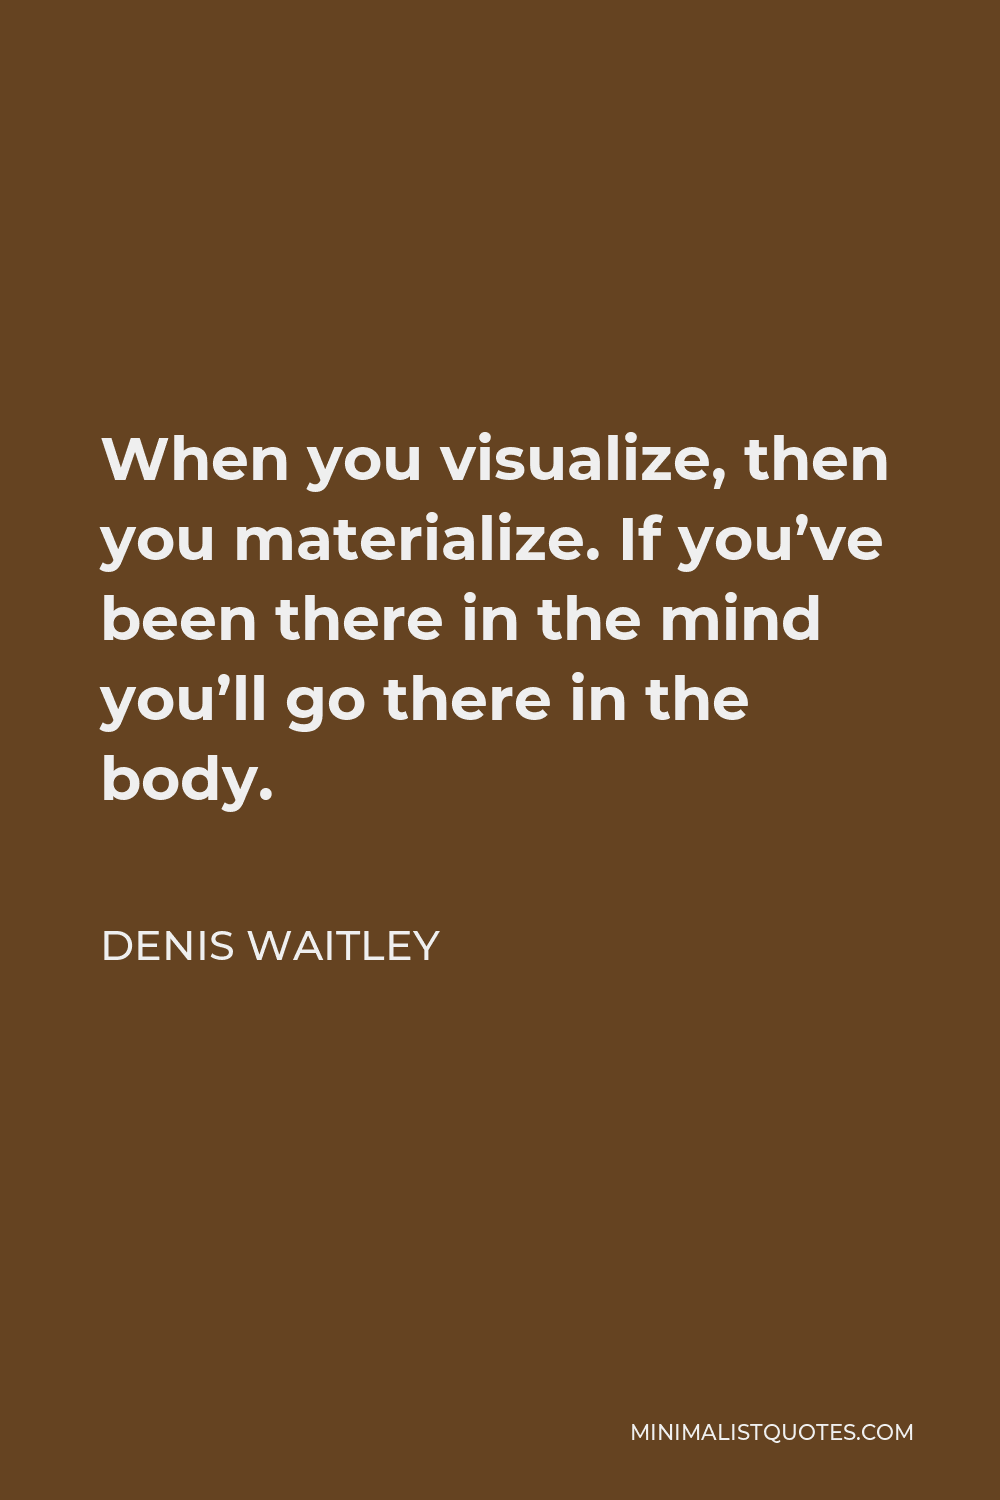 Denis Waitley Quote - When you visualize, then you materialize. If you’ve been there in the mind you’ll go there in the body.